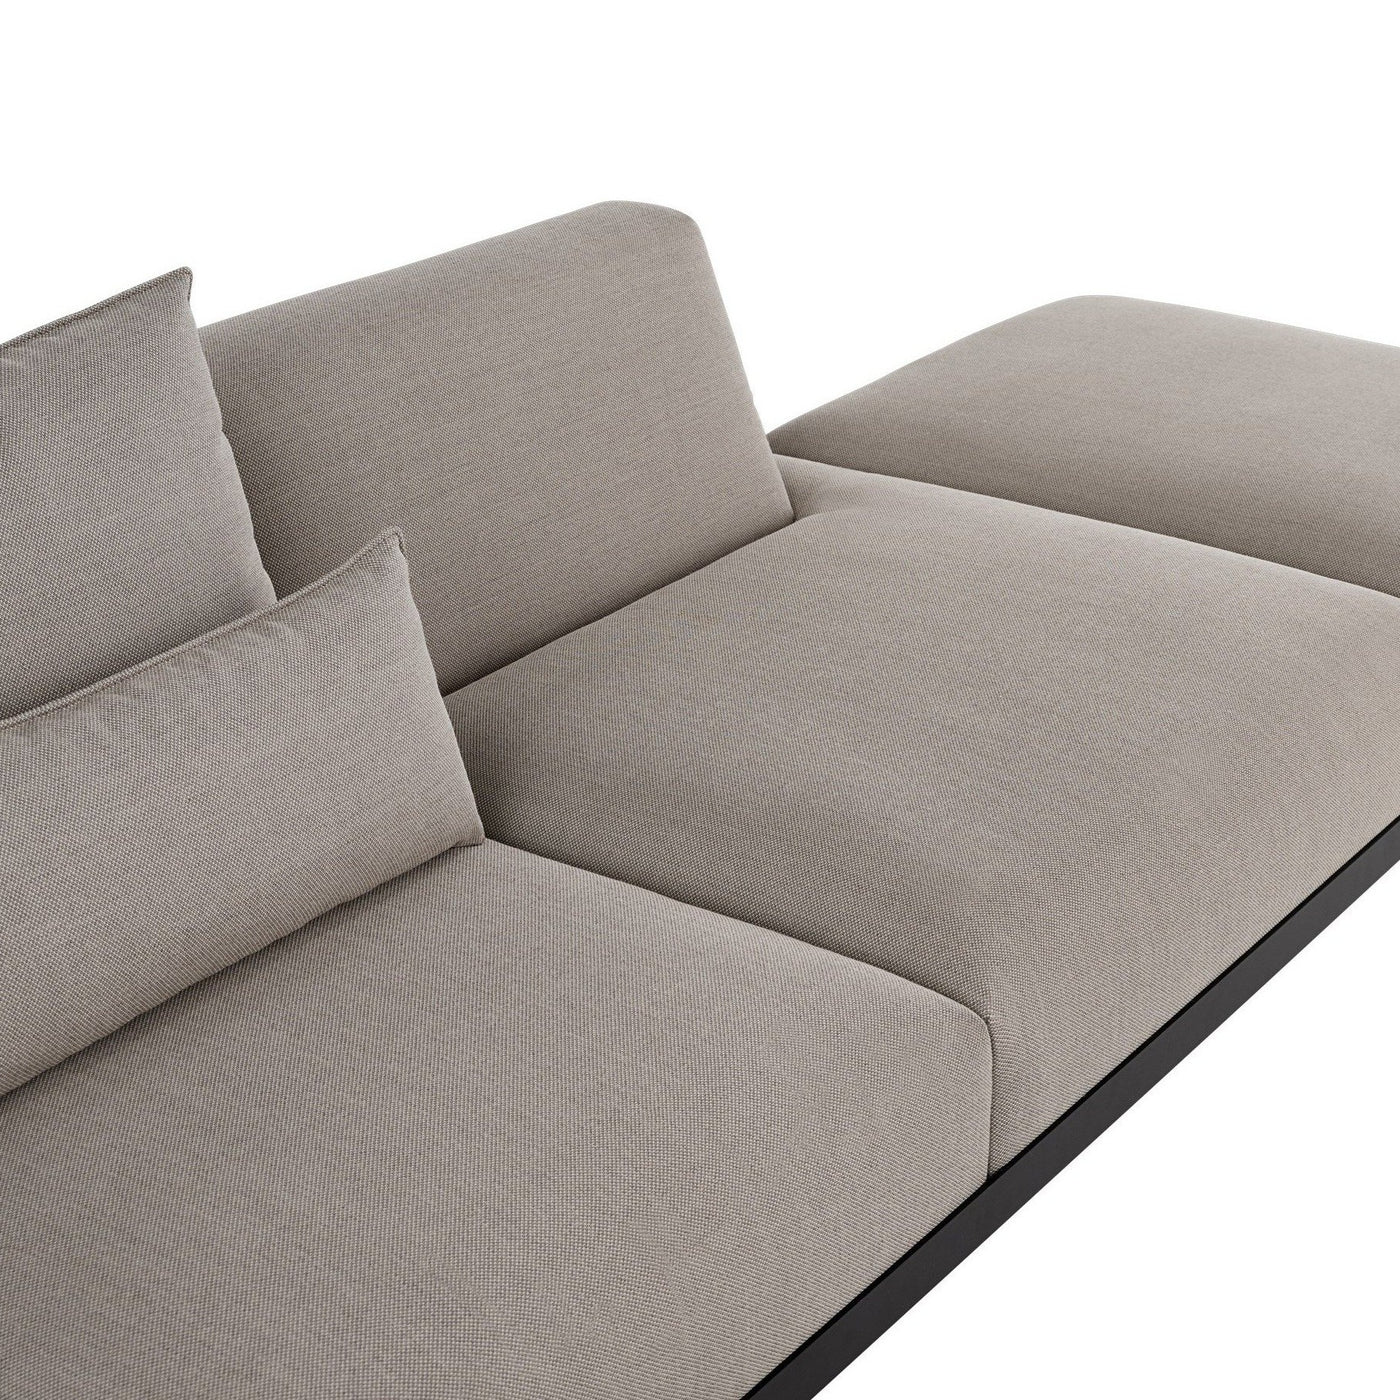 Muuto In Situ Modular 4 Seater Sofa configuration 5. Made to order from someday designs. #colour_fiord-262